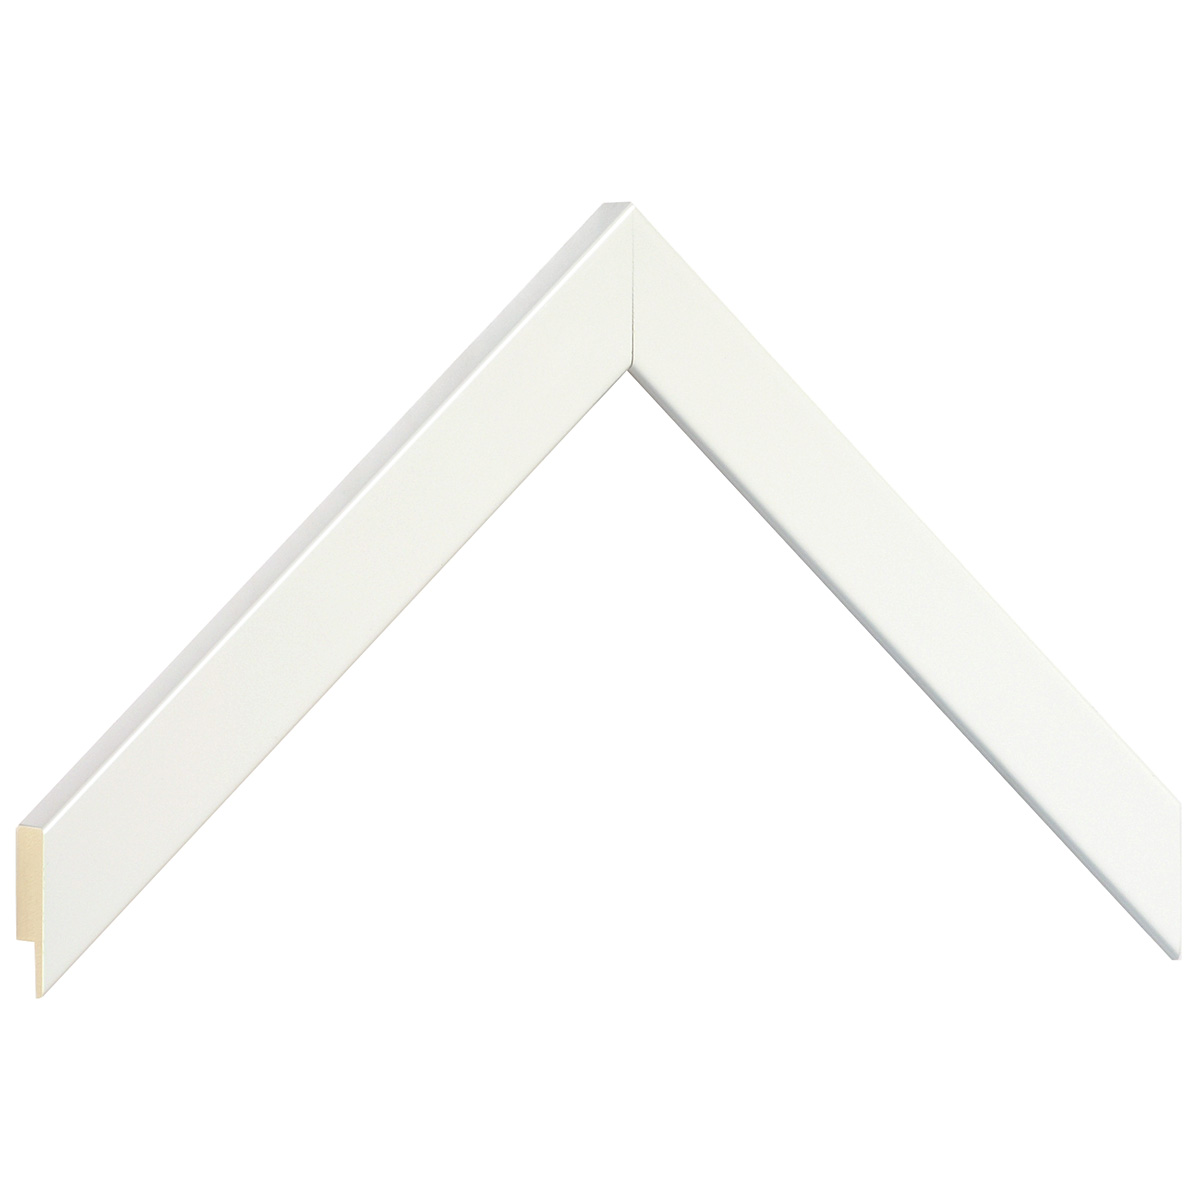 Moulding ayous - width 20mm height 14 - Glossy white - Sample